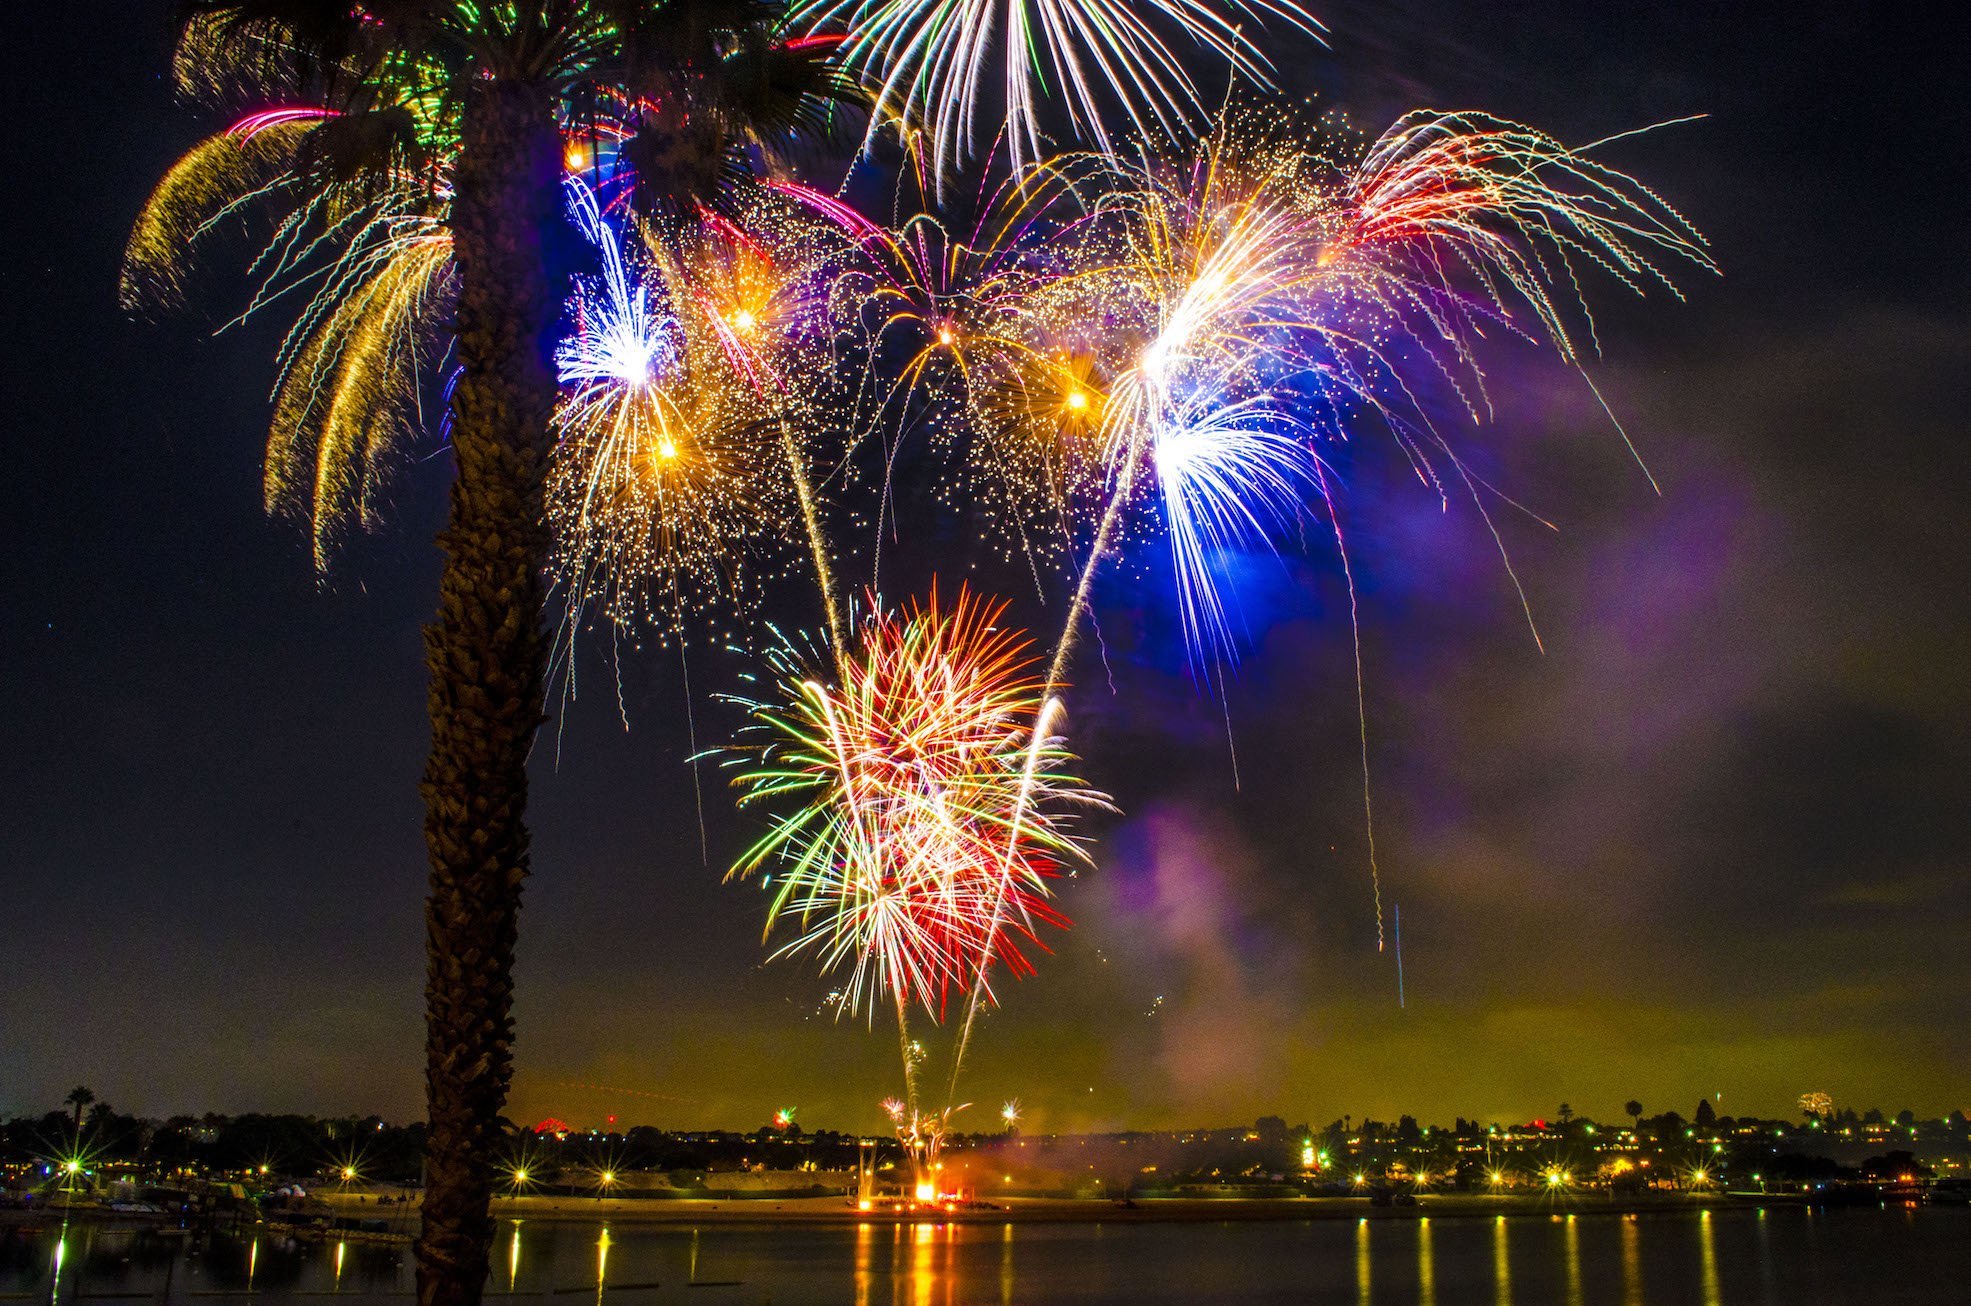 View Spectacular July 4th Fireworks at These 5 Orange County Restaurants